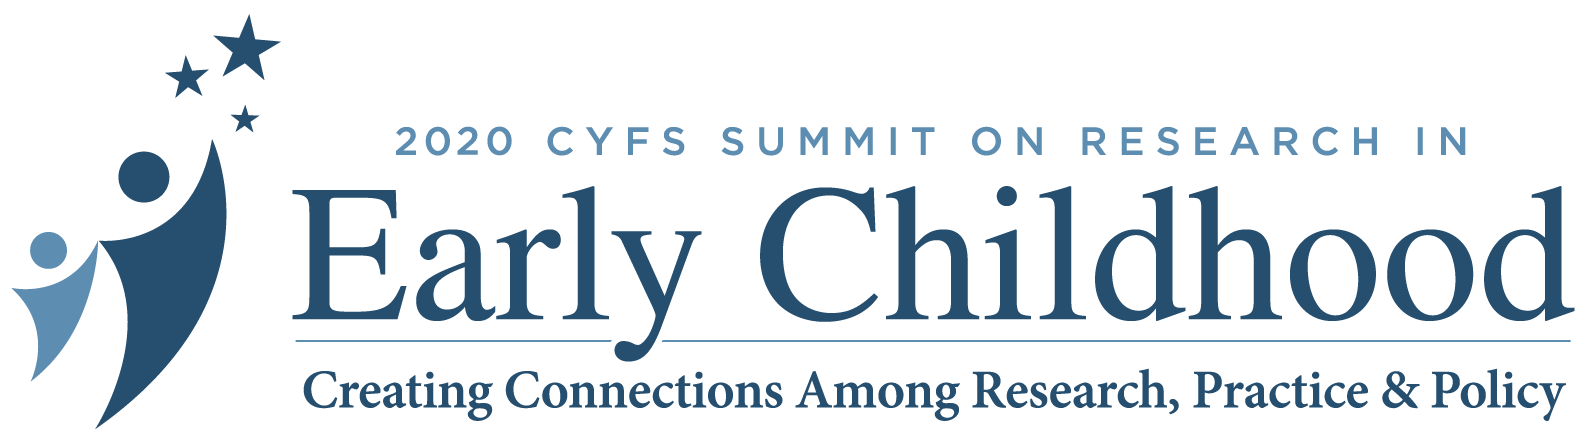 2018 CYFS Summit on Research in Early Childhood